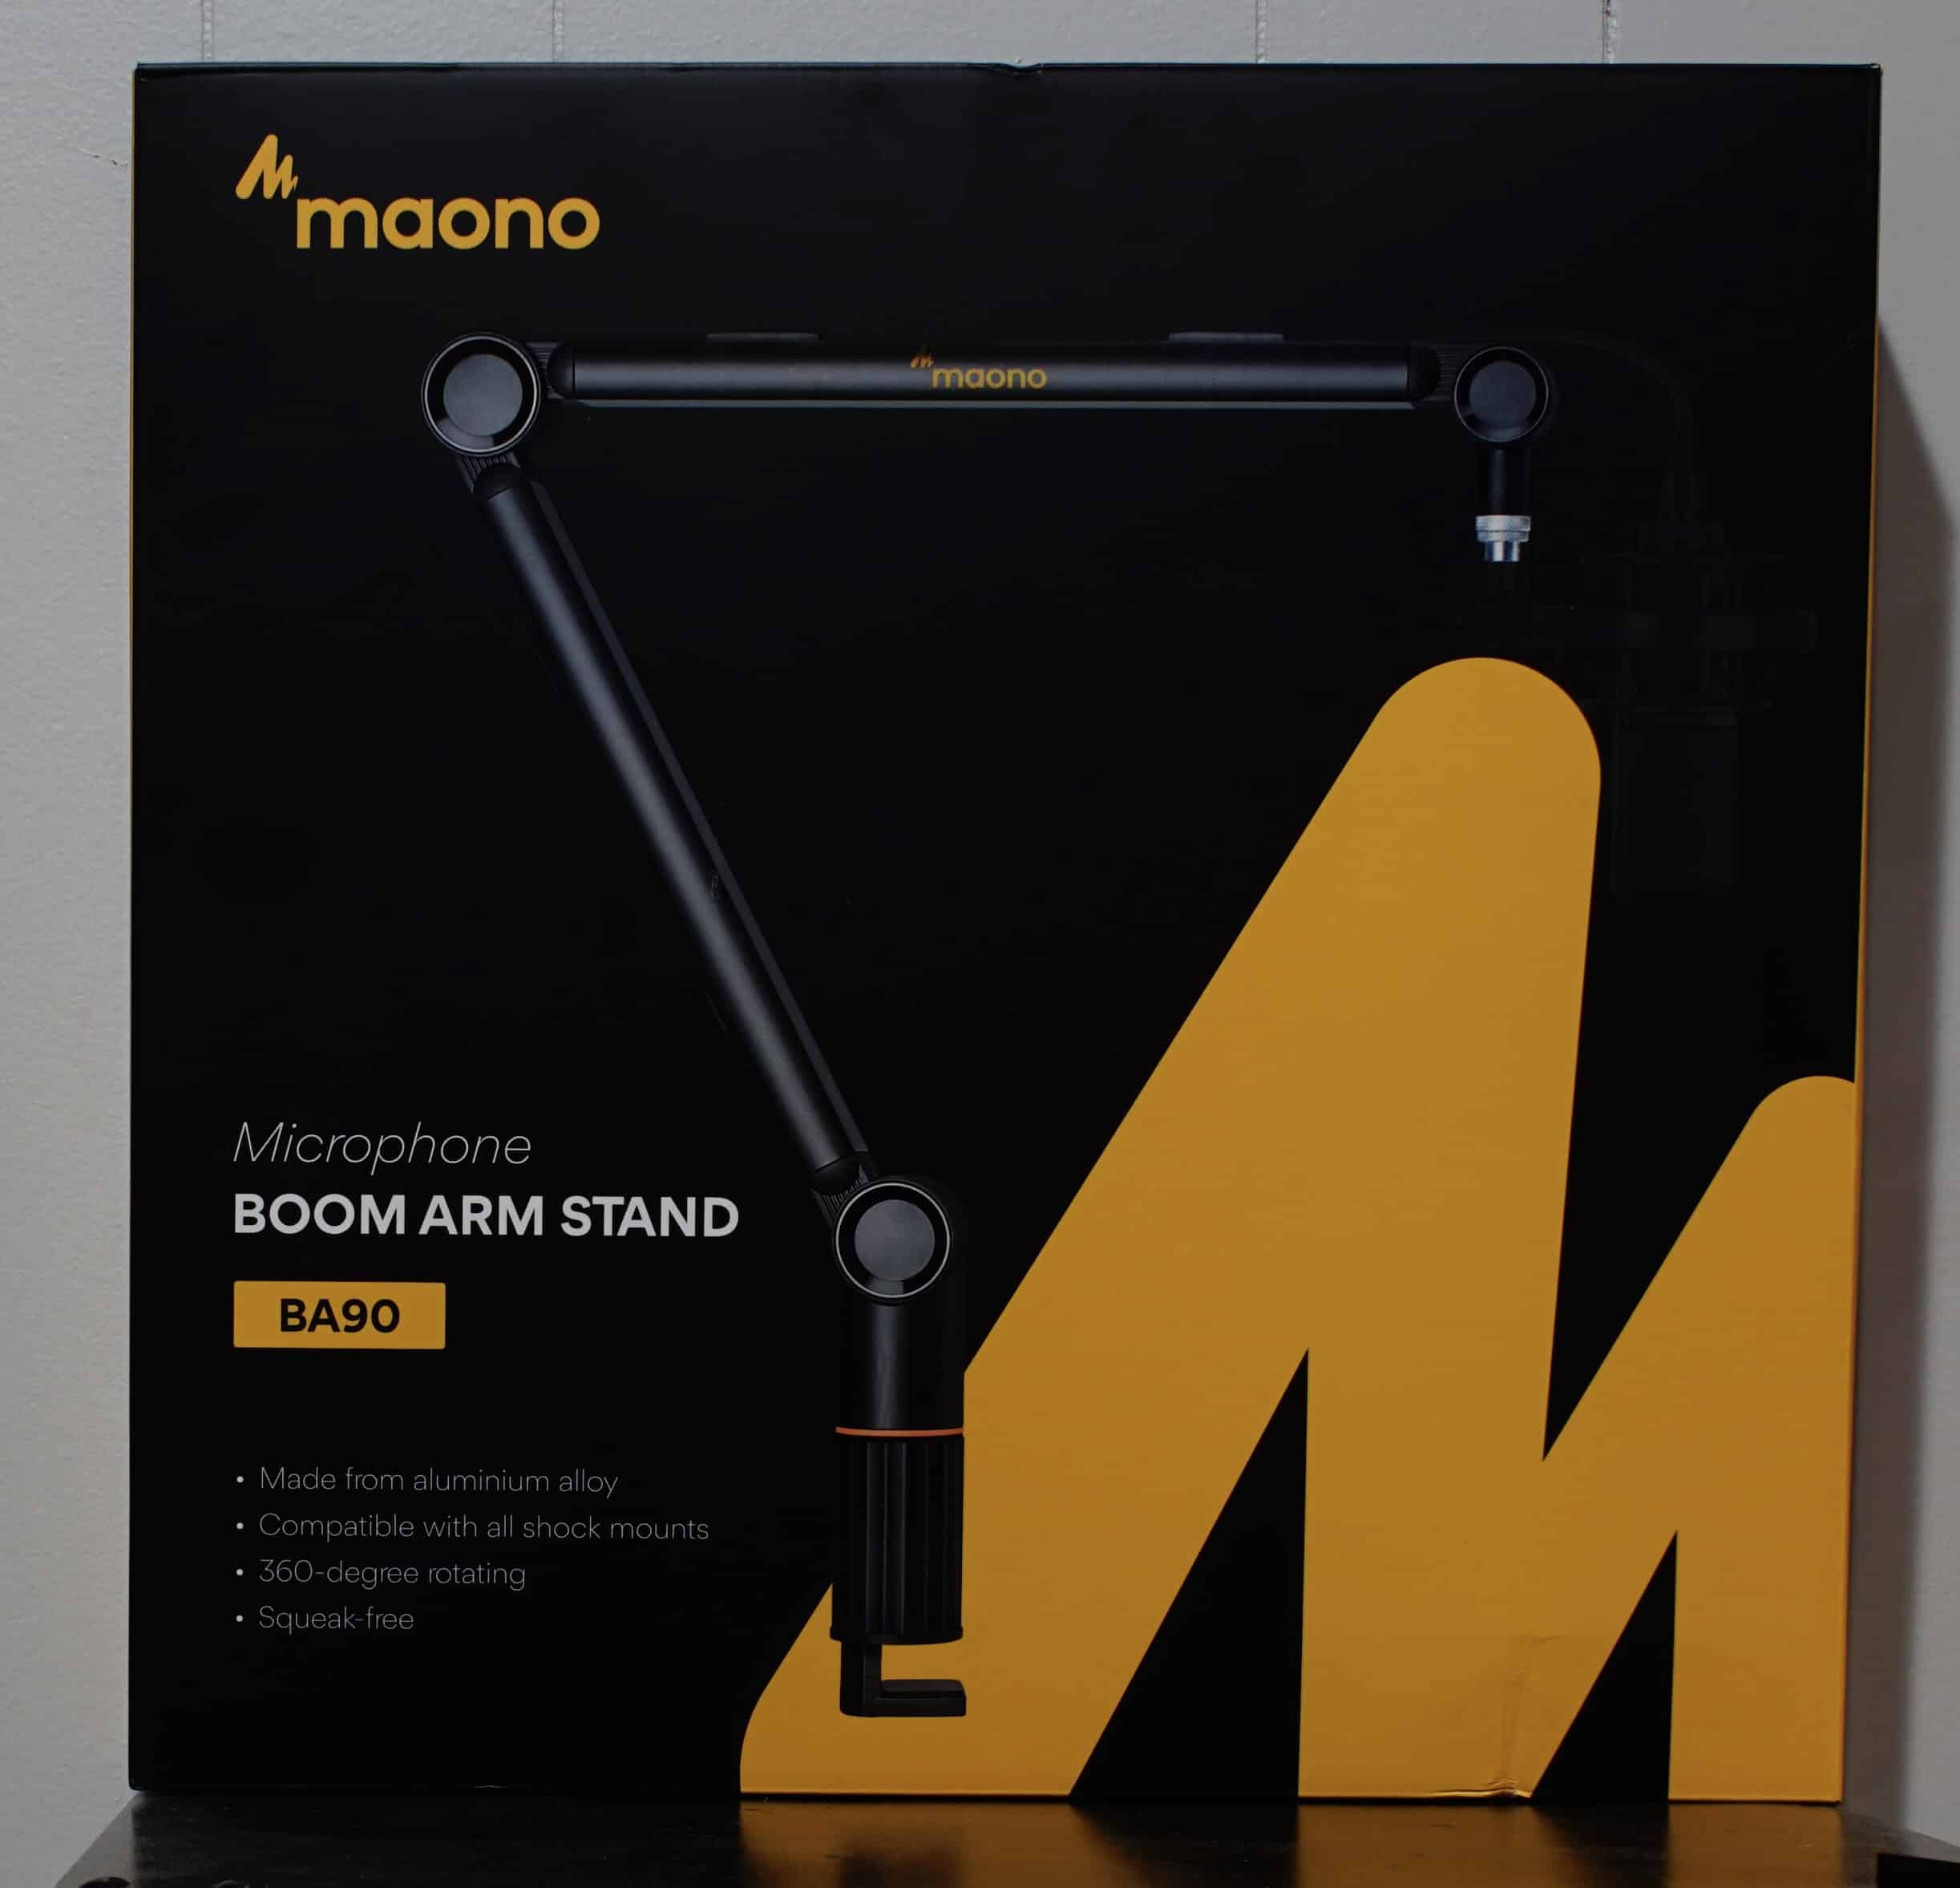 Maono BA90 Microphone Boom Arm Stand Review 23423